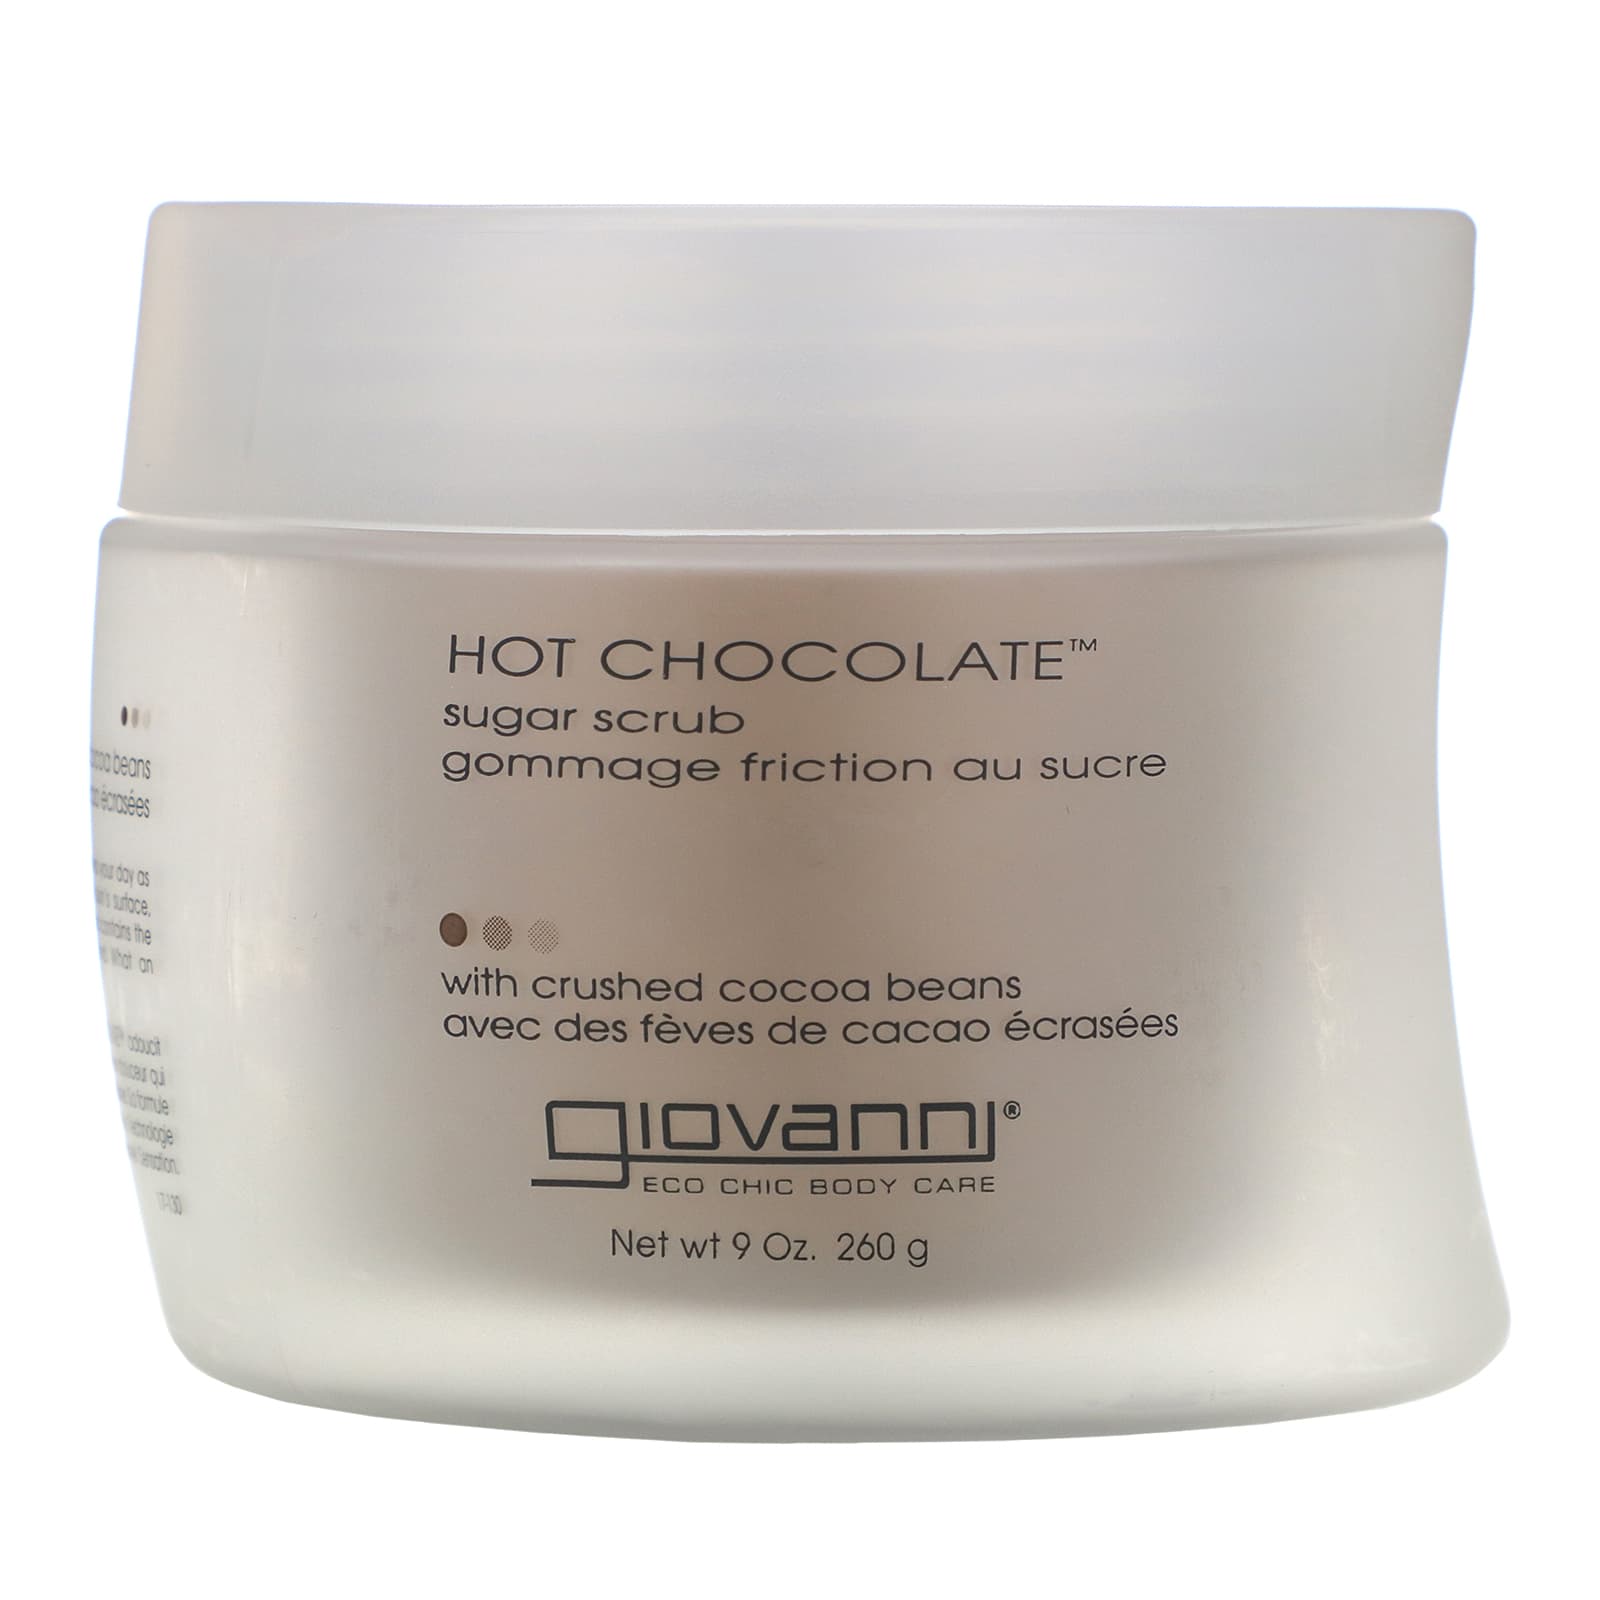 Giovanni, Hot Chocolate, Sugar Scrub with Crushed Cocoa Beans (260 g)